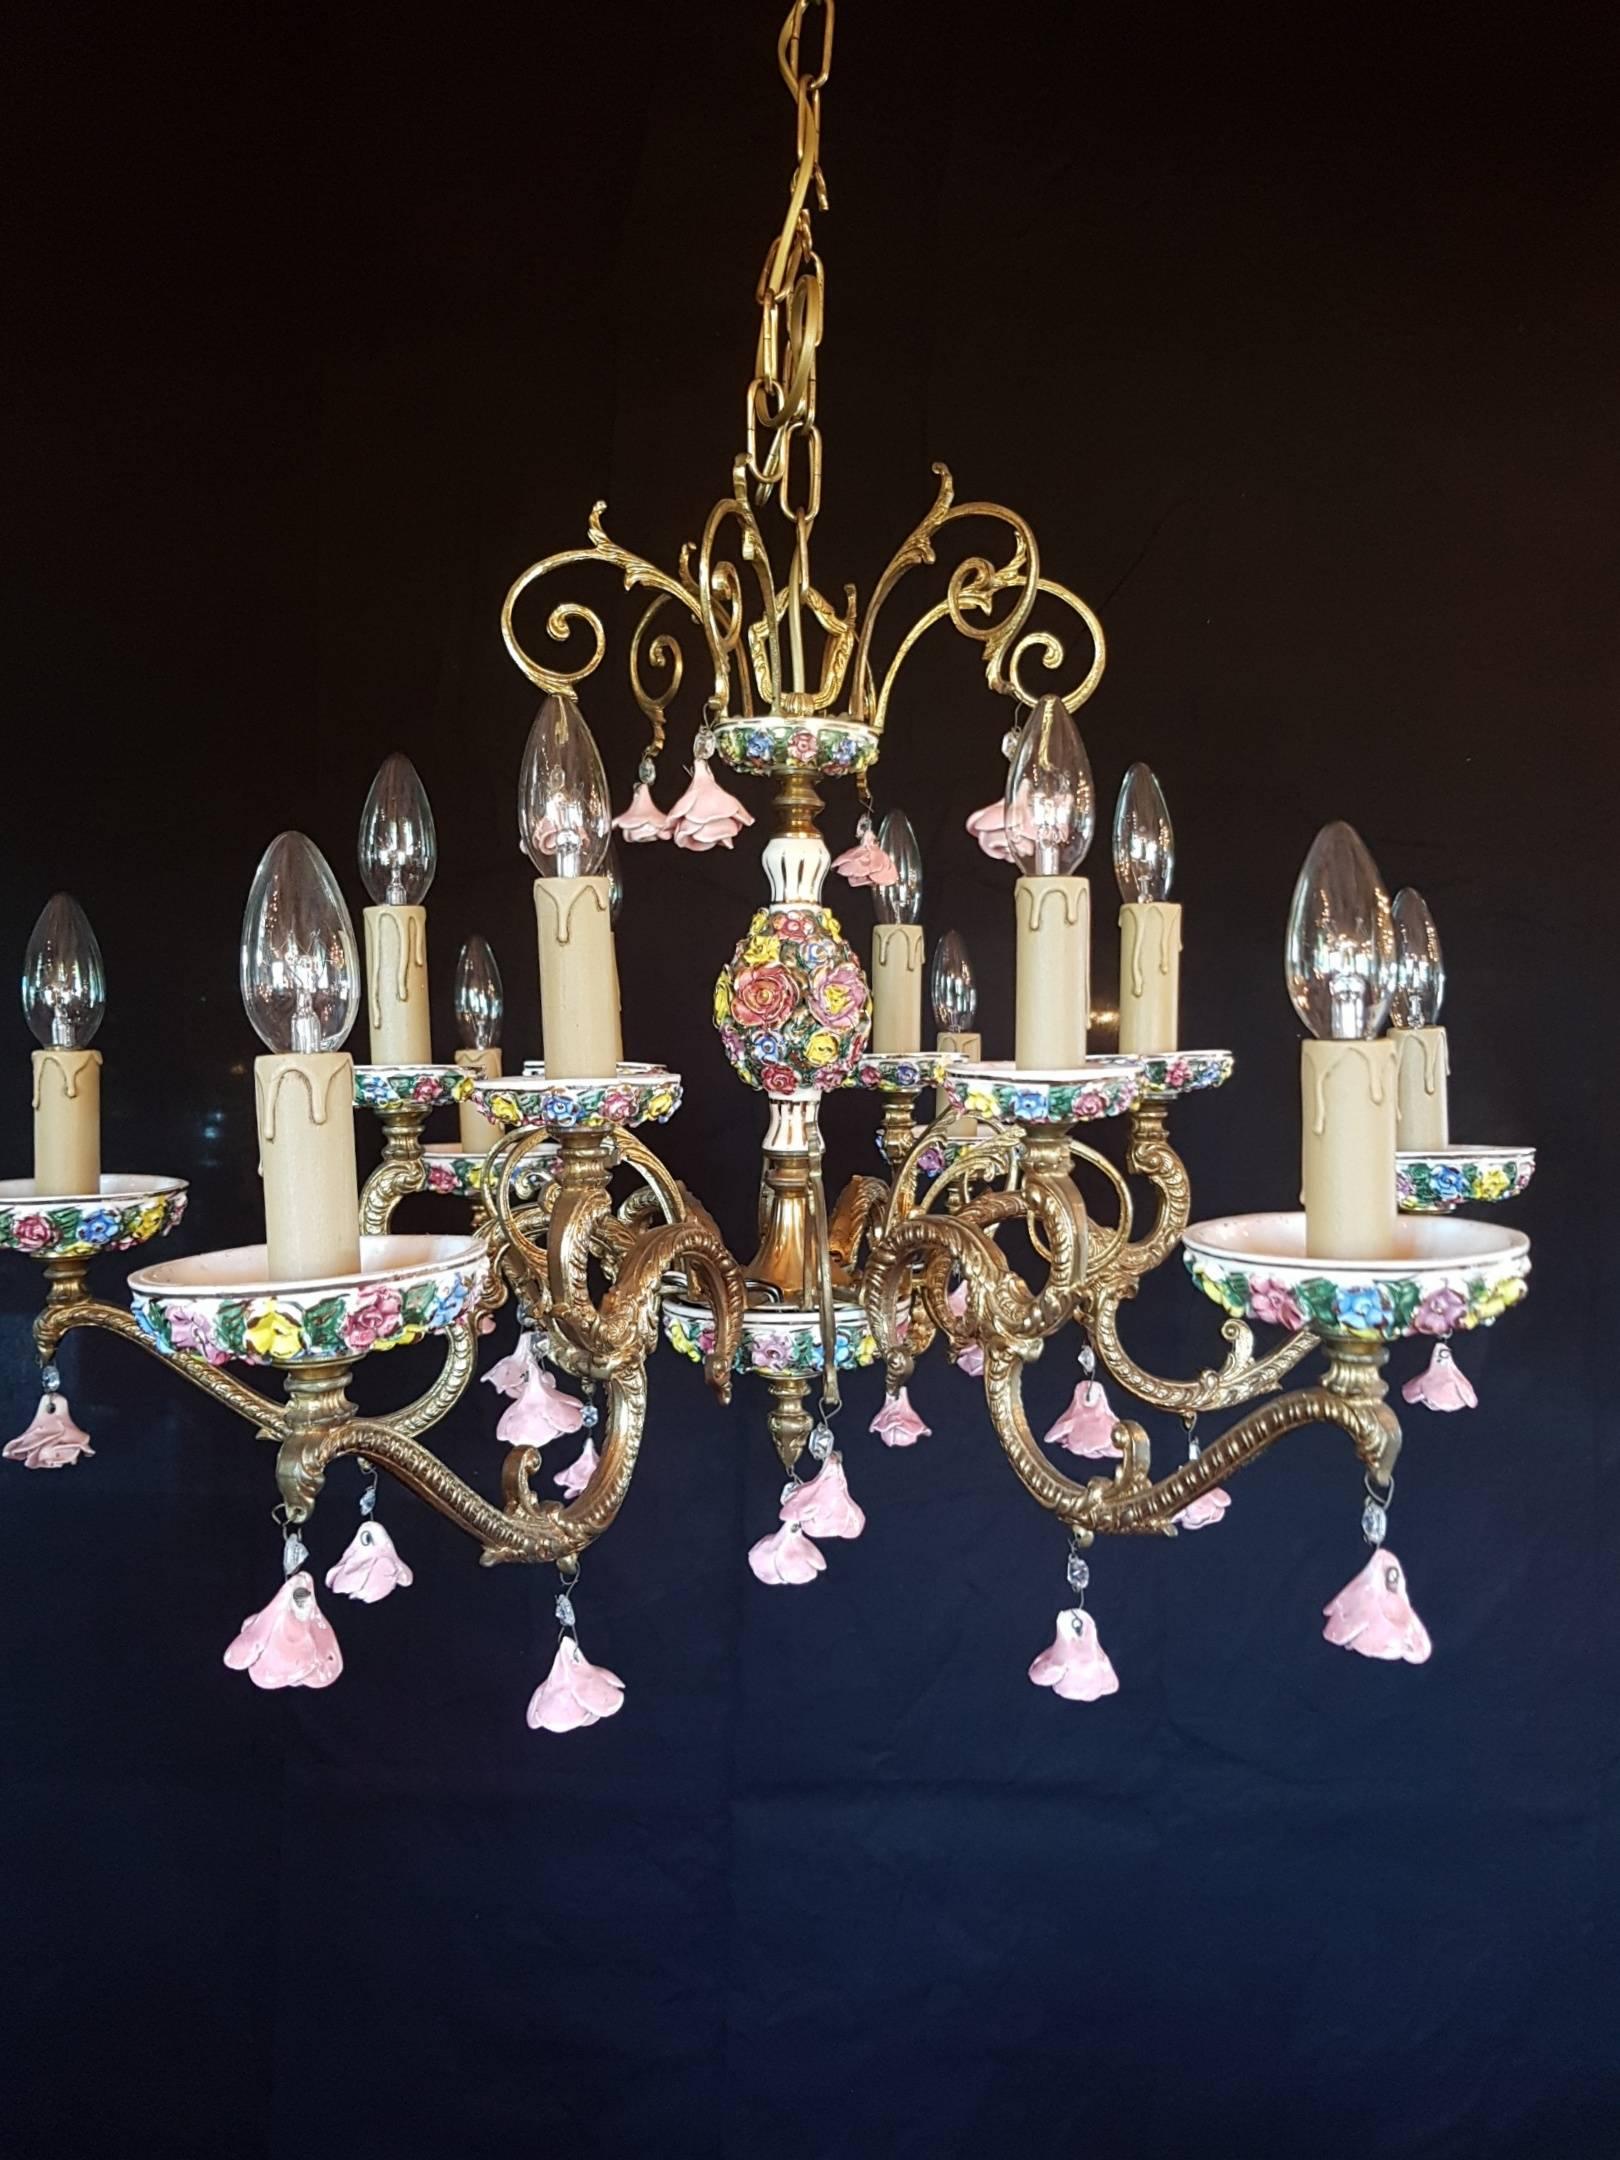 Italian bronze chandelier with bobeches and the vase in the central made of porcelain. The chandelier is decorated with tiny roses of porcelain. The colors are looking very nice. This chandelier has 12 candle lights.

This is just one of our large